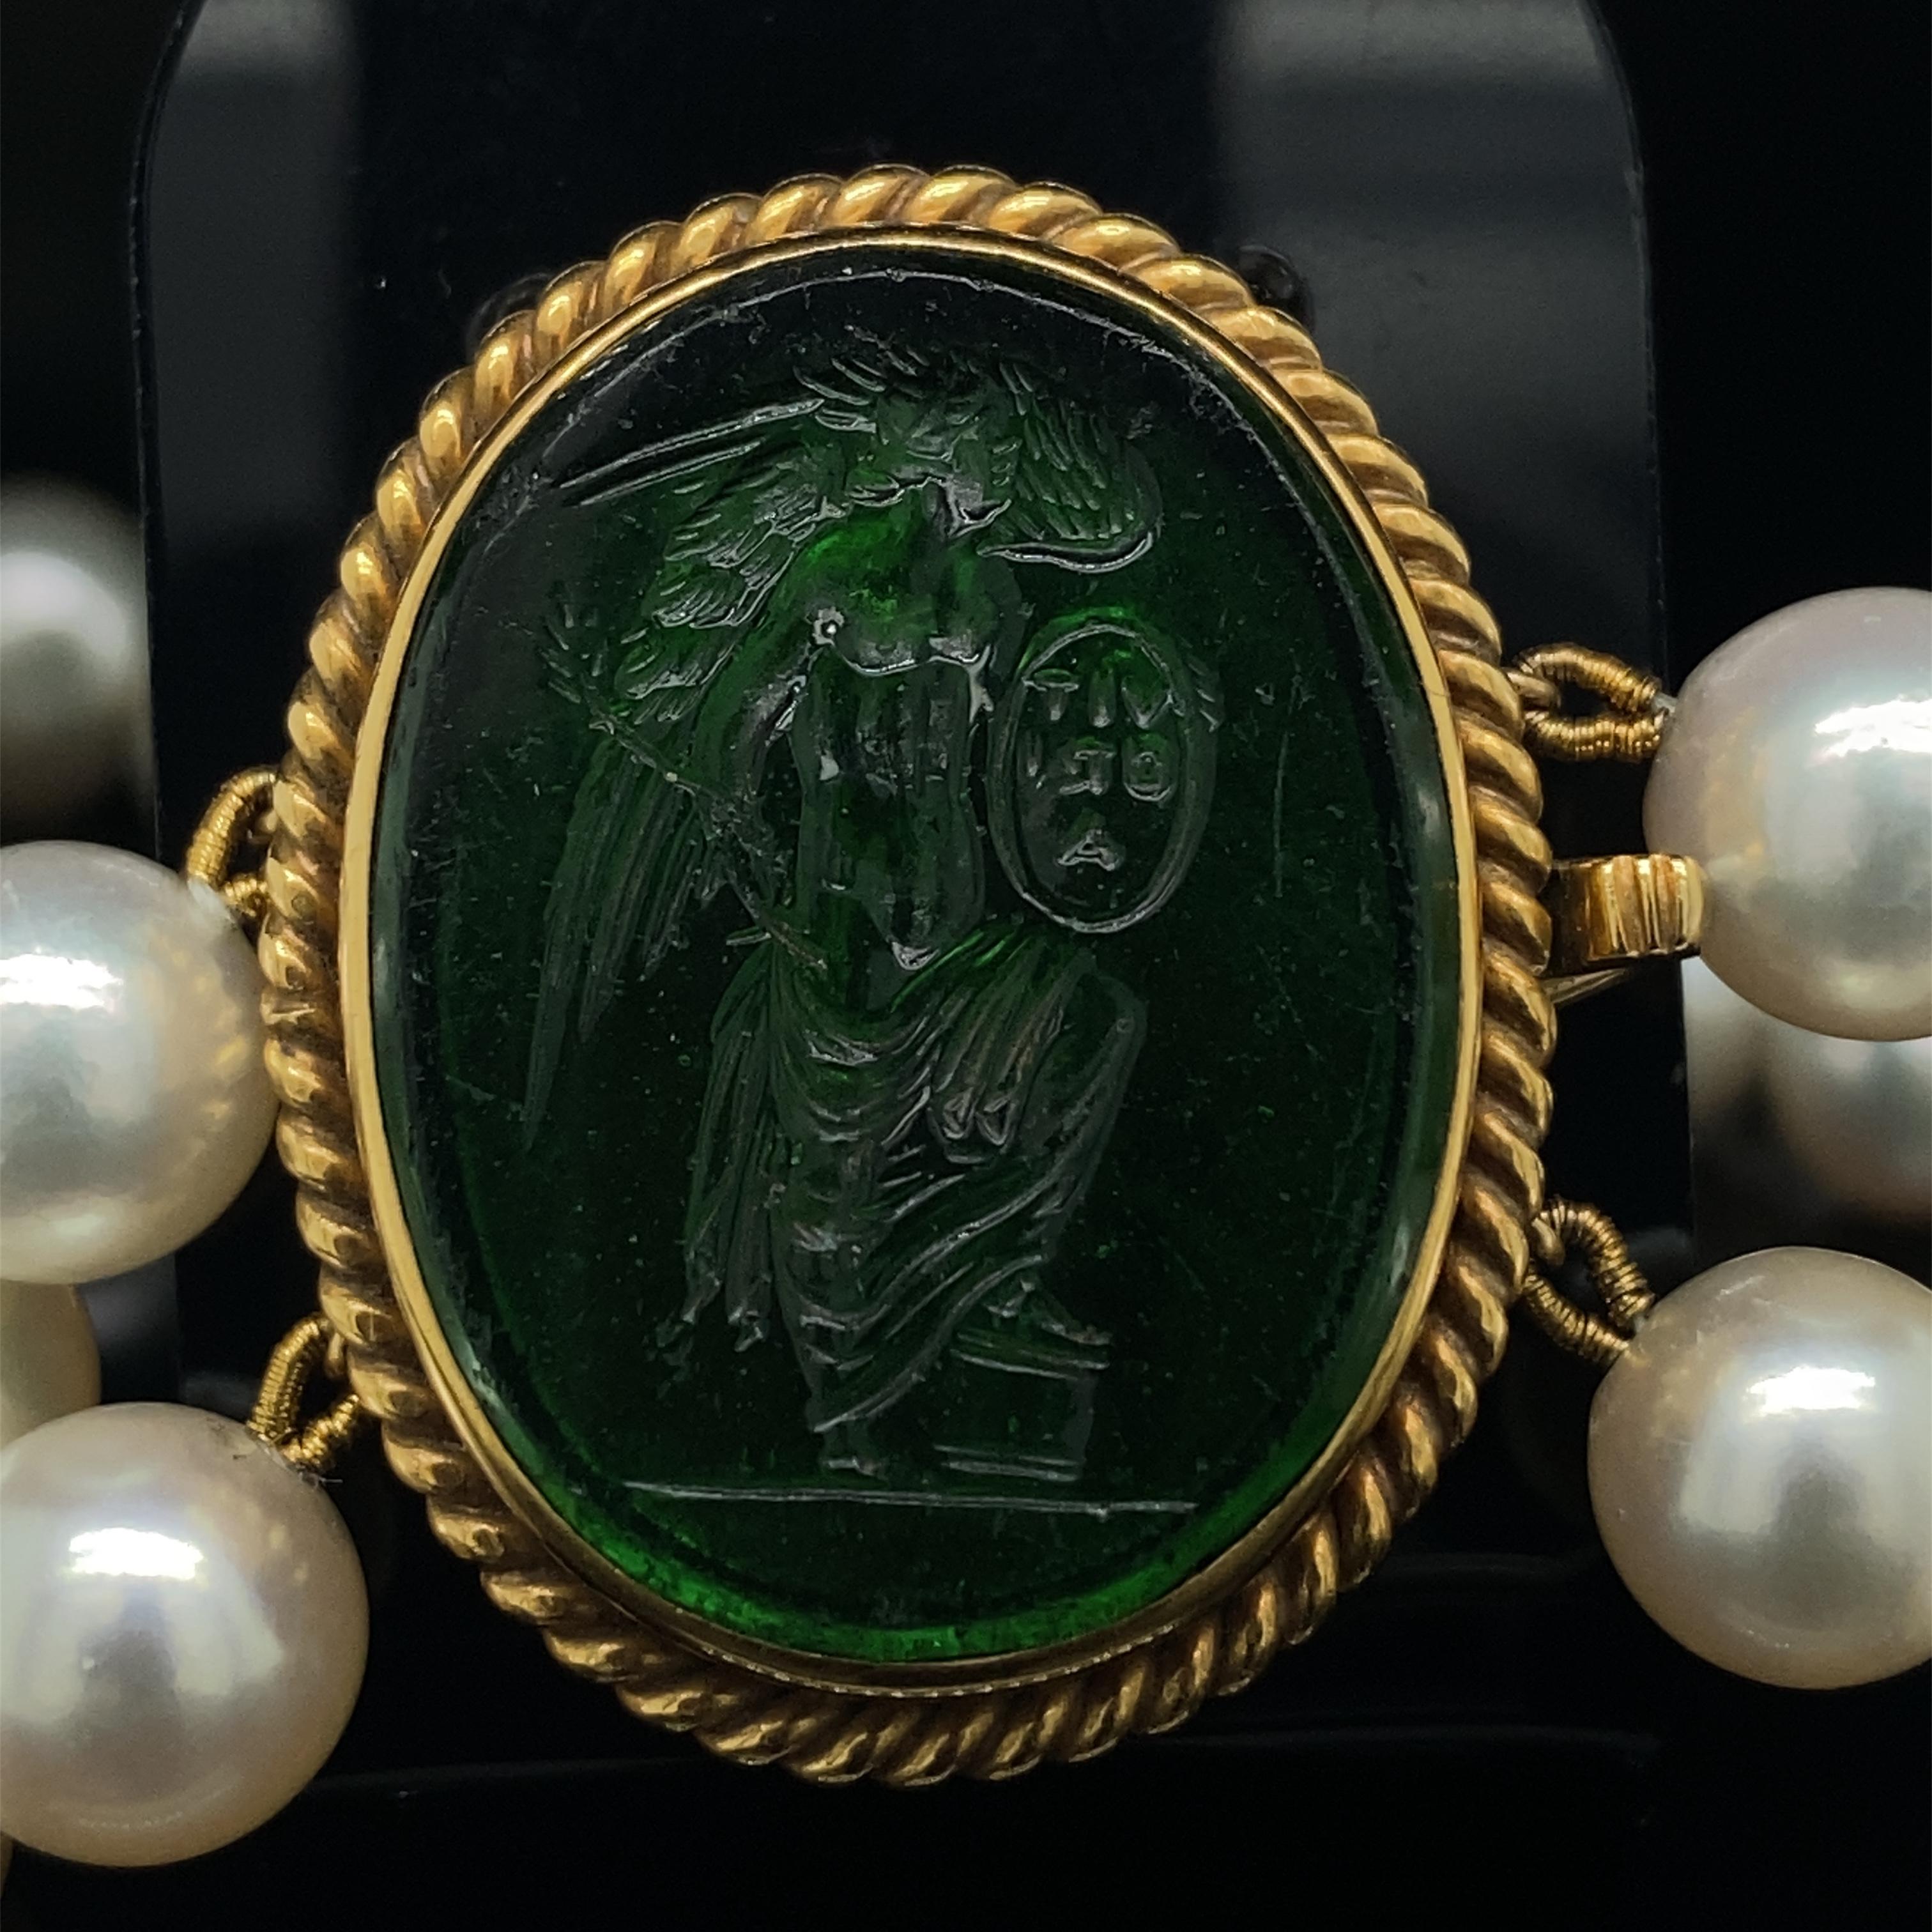 A Cartier two row pearl necklace with yellow gold hardstone revival clasp, circa 1970.

The necklace comprises of two rows of fine round cultured Pearls measuring uniformly 8.5mm approximately in diameter. The pearls are creamy white in colour,